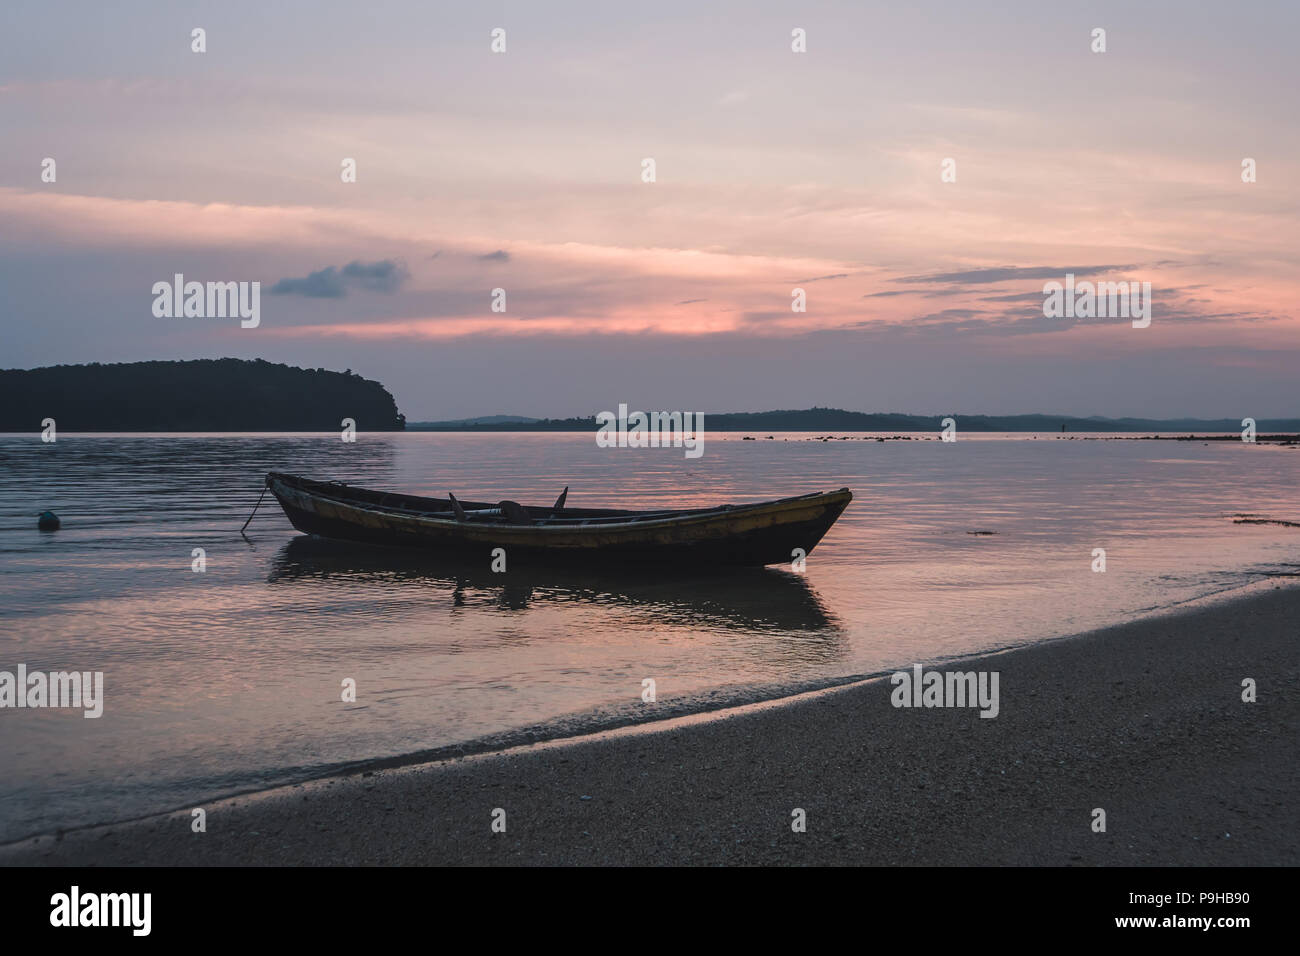 A boat is floating on River Ganges at the time of Sunrise in Varanasi, India. Stock Photo